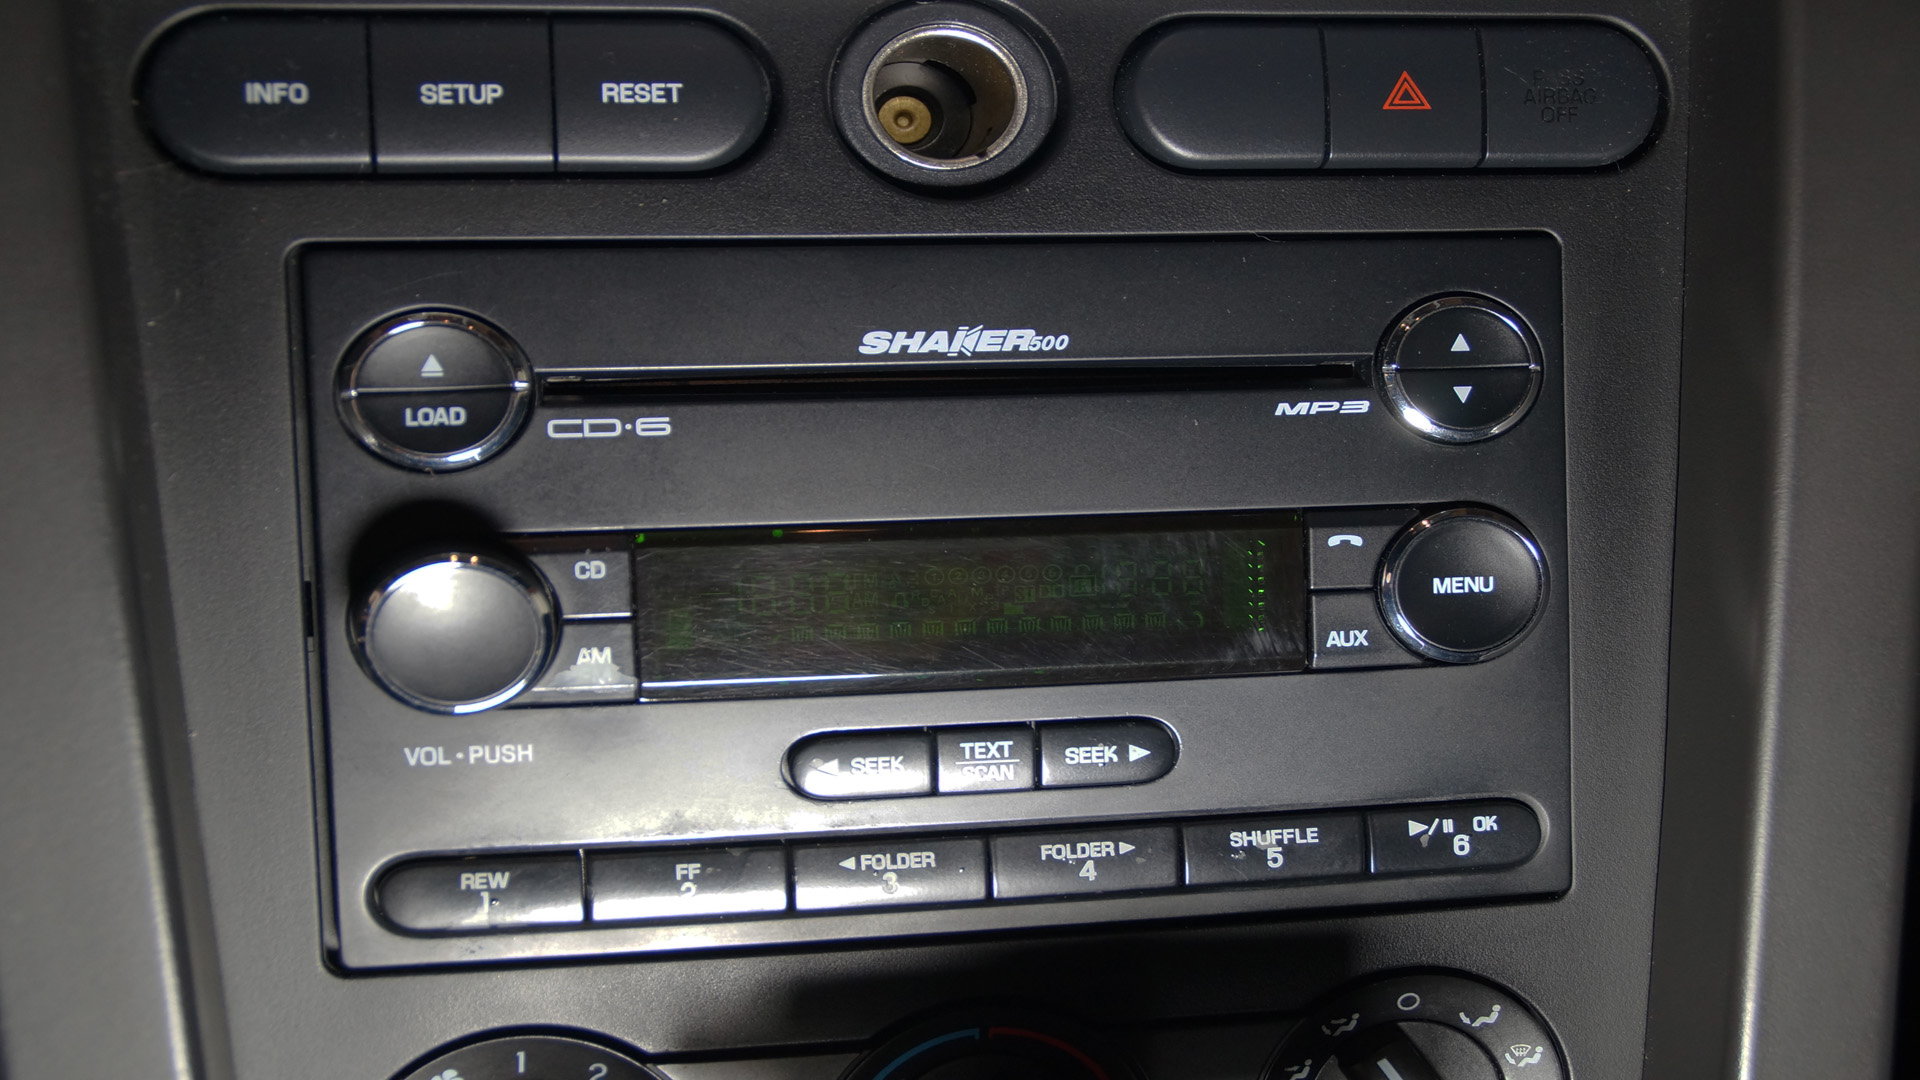 Ford Mustang V6 2005-2014: Why Won't My Windows and Radio Work? |  Mustangforums  2007 Ford Mustang Cd6 Car Stereo Wiring Diagram    Mustang Forums